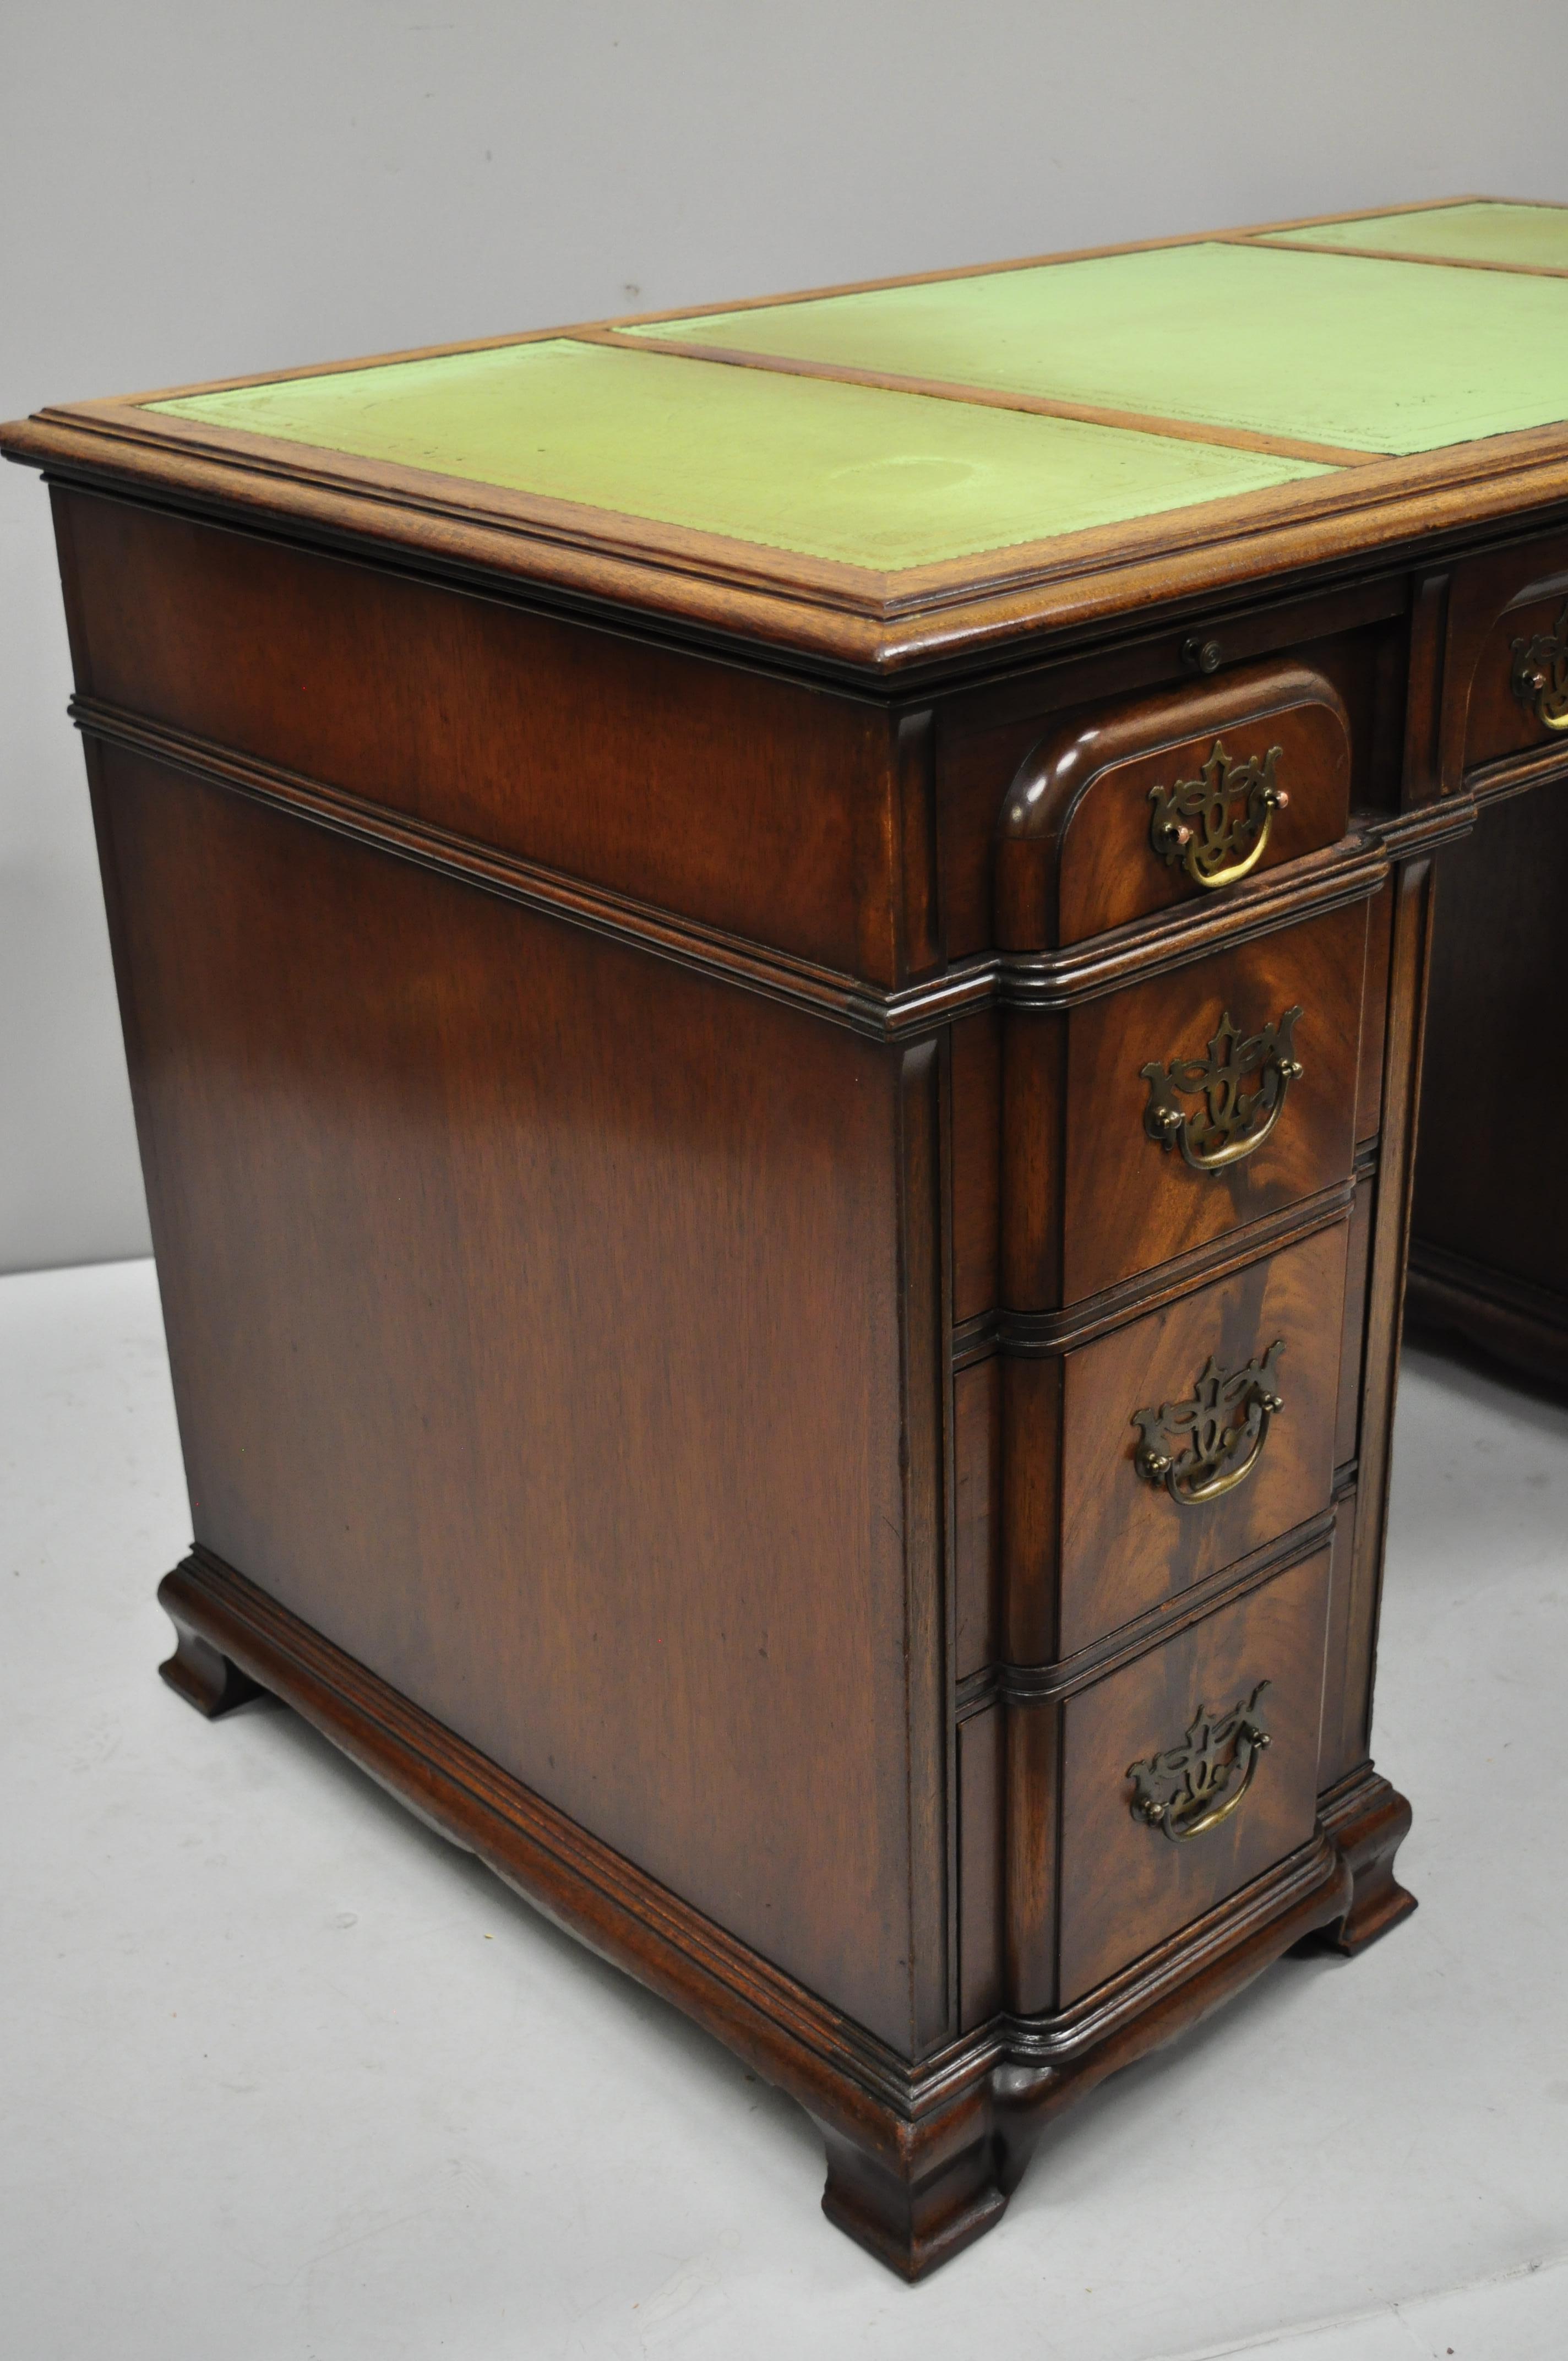 American Crotch Mahogany Chippendale Block Front Green Leather Top Knee Hole Writing Desk